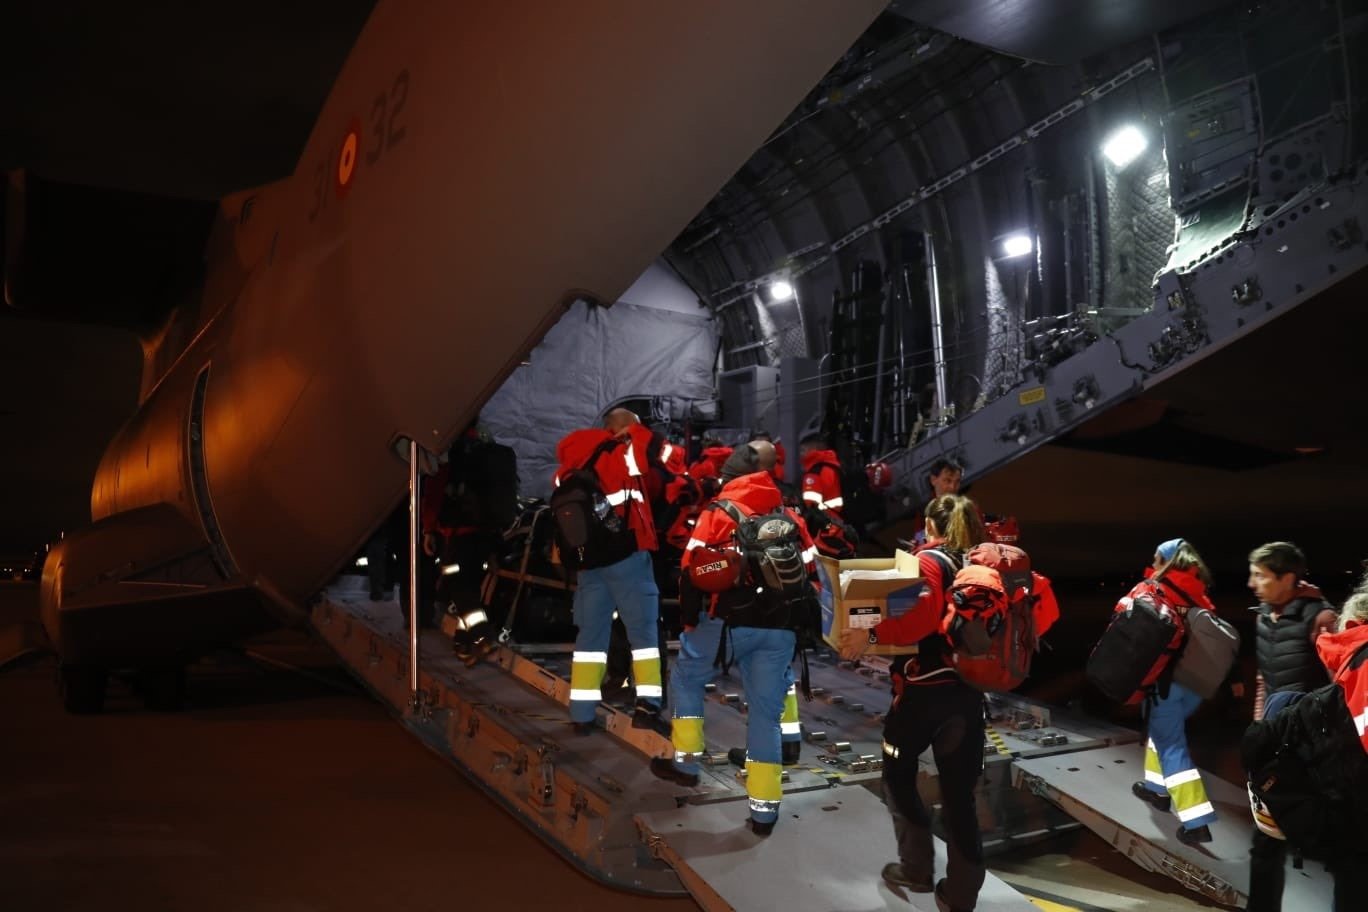 Spanish search and rescue mission boards cargo plane with necessary equipment and personnel to assist humanitarian work, and relief efforts after massive earthquakes, Tuesday, Feb. 7, 2023. (IHA Photo)